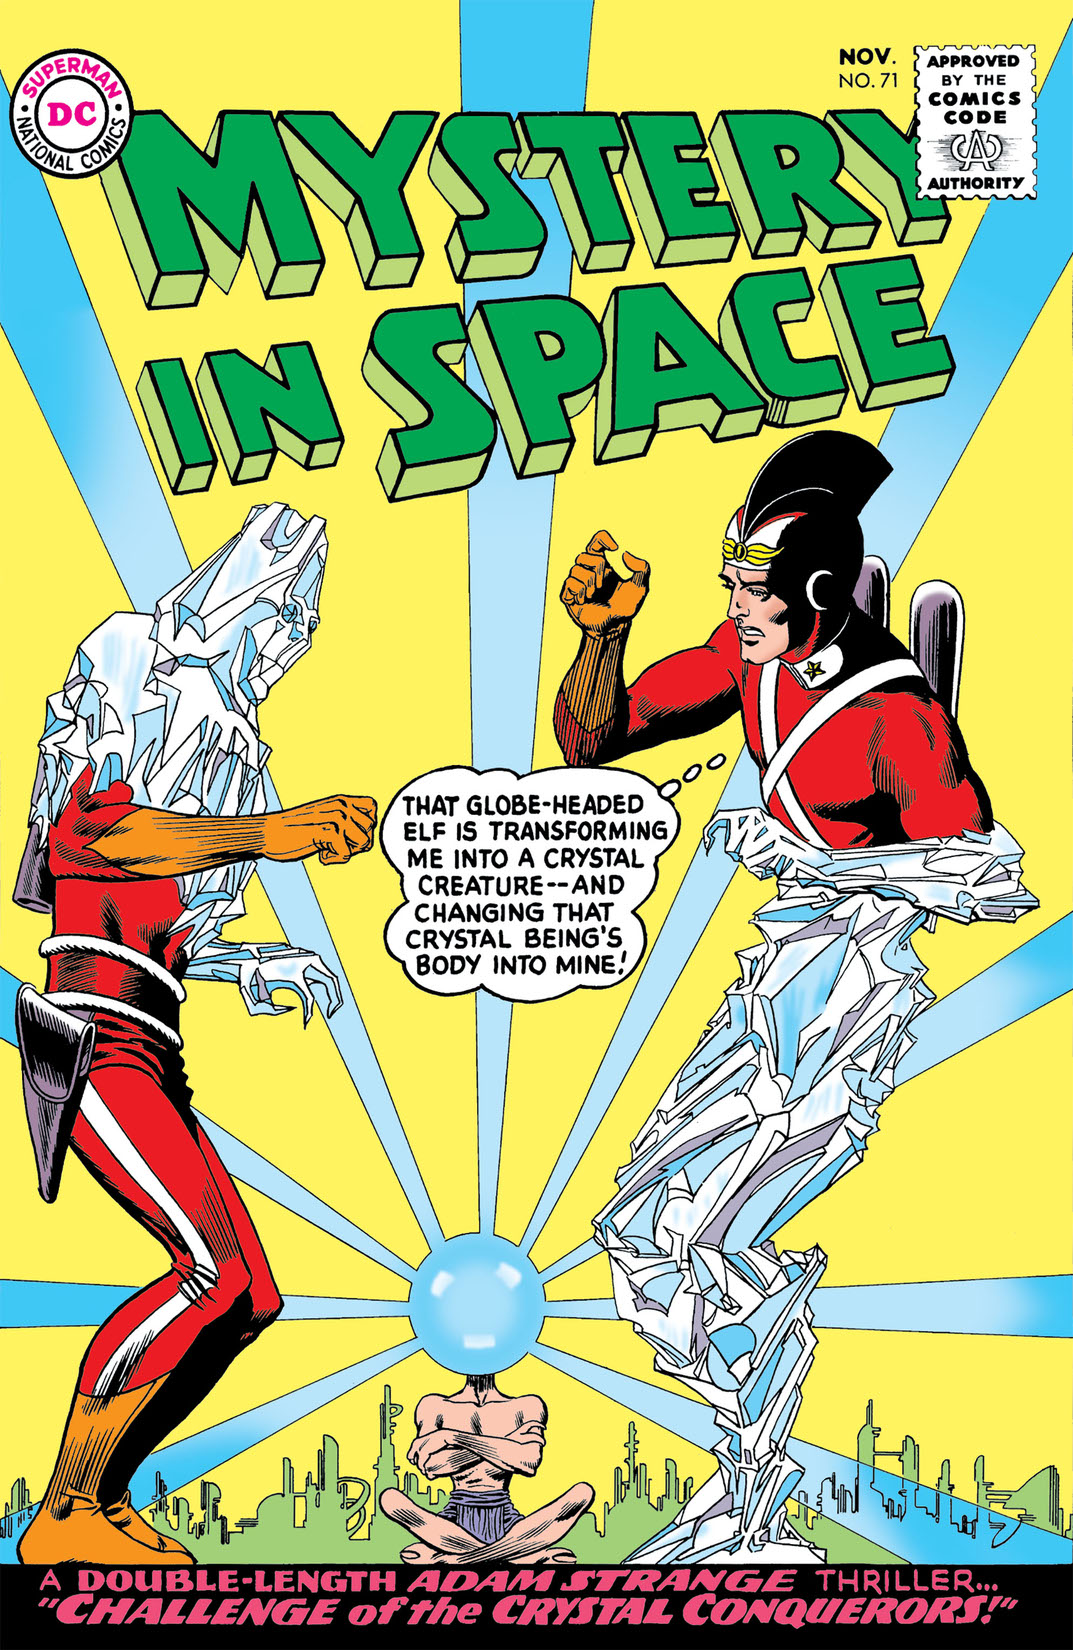 Mystery in Space (1951-) #71 preview images